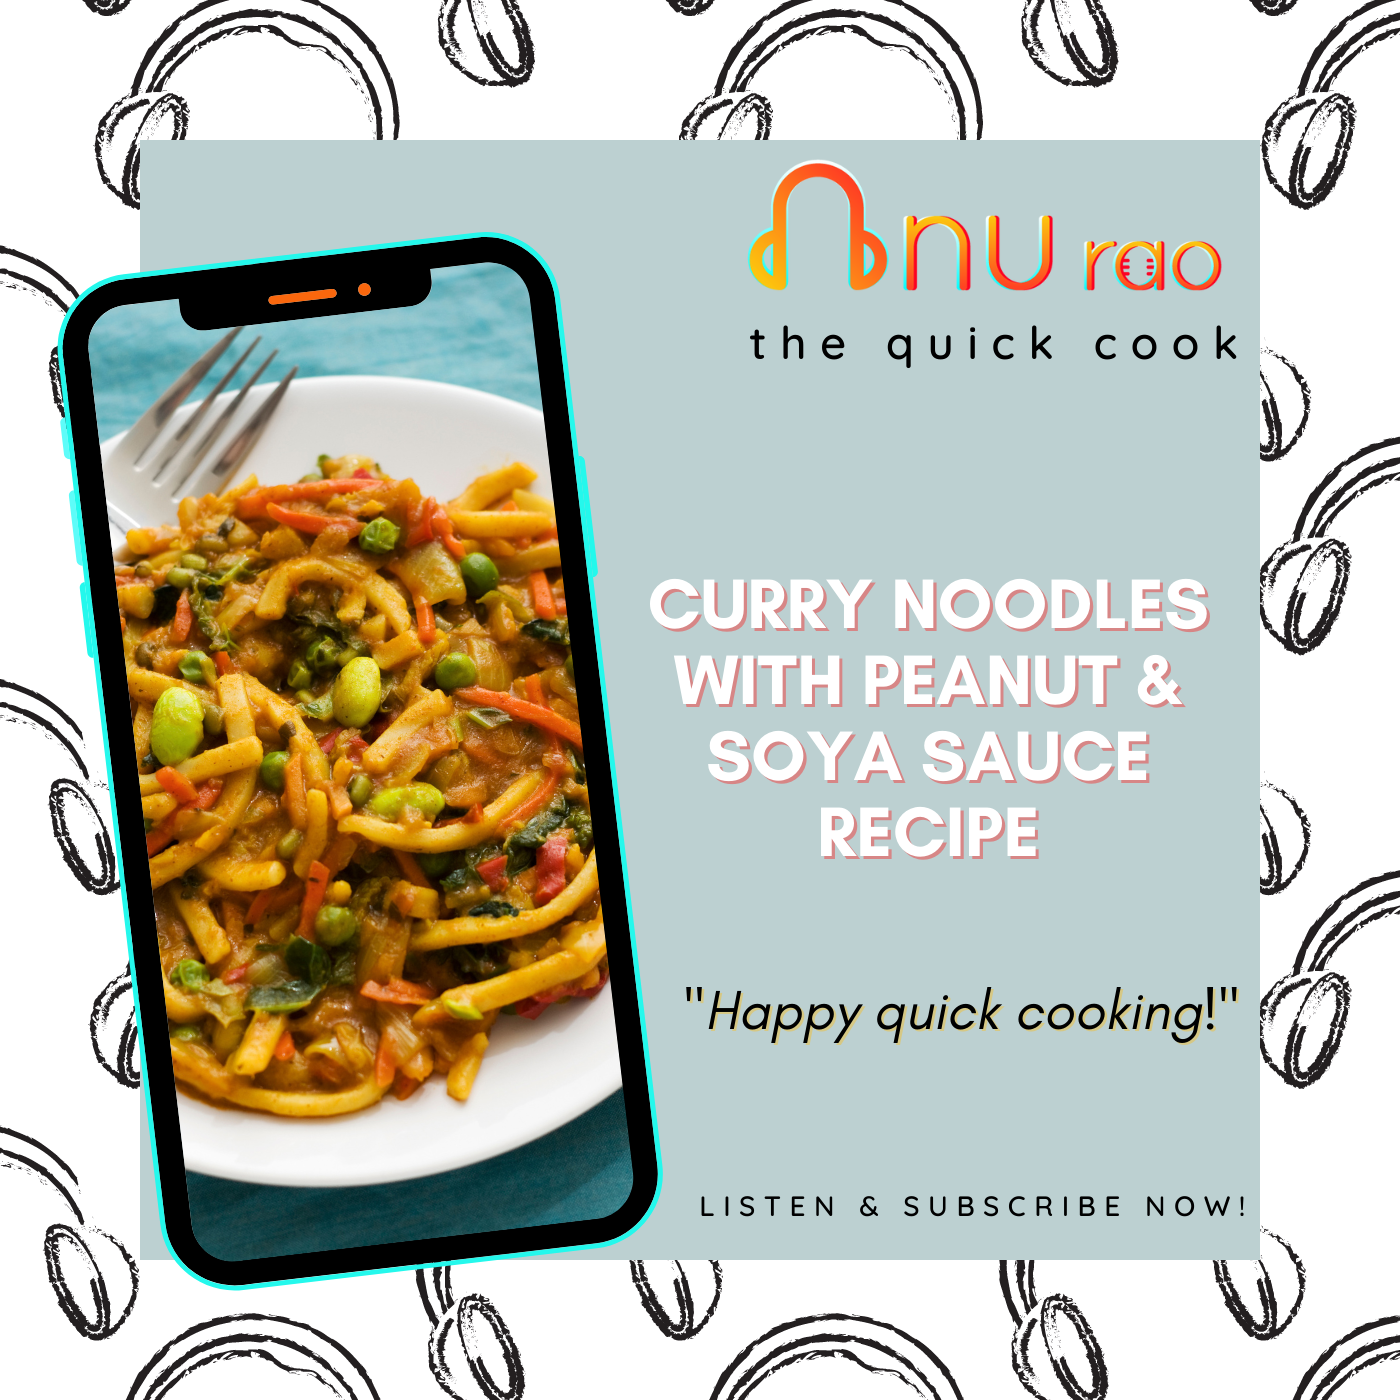 Curry Noodles with Peanut & Soya Sauce